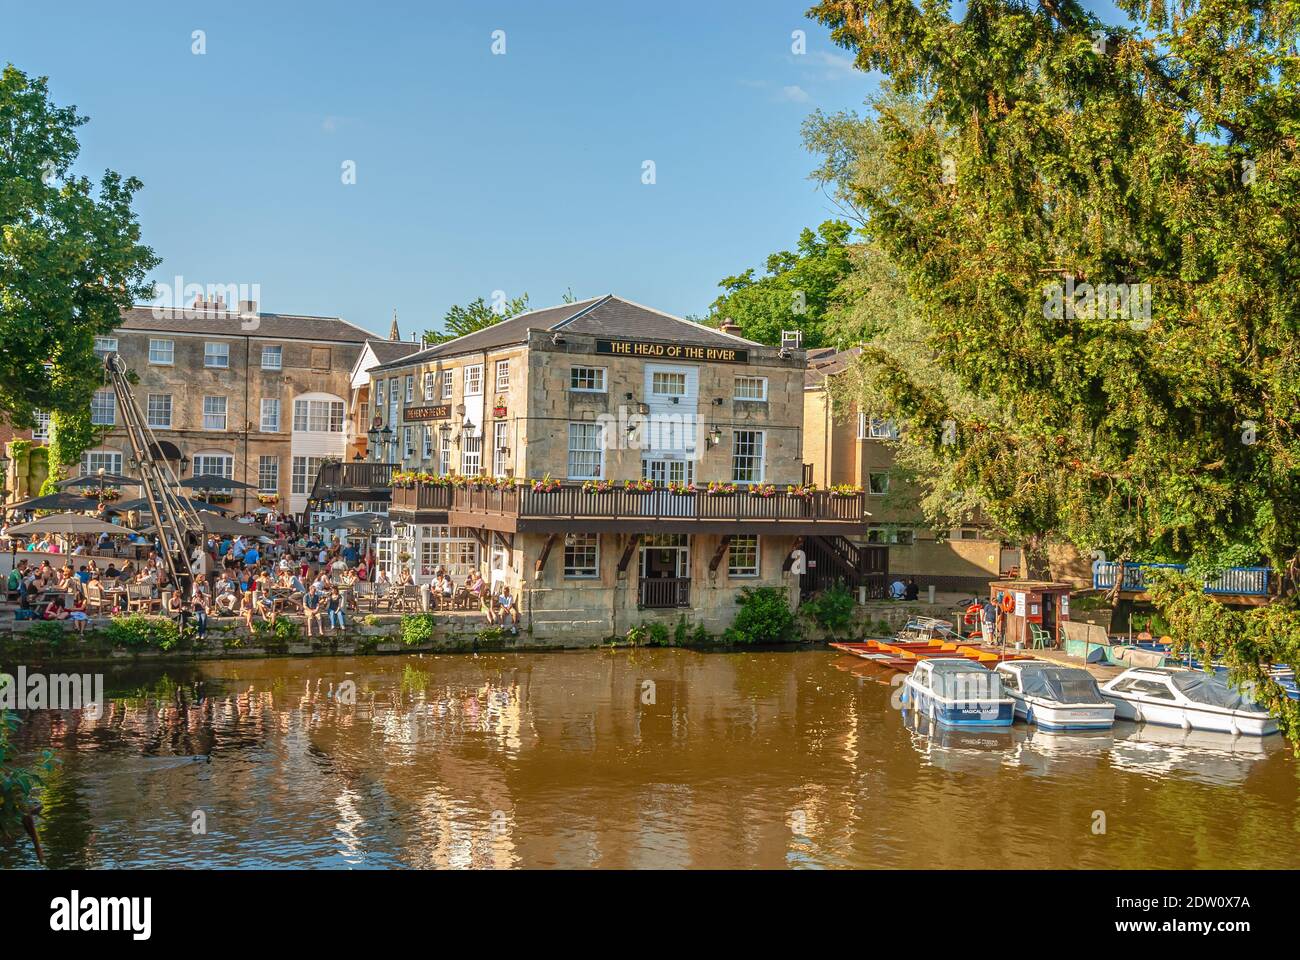 Students relax at the Head of the River Pub at the banks of the River Thames in Oxford, England Stock Photo